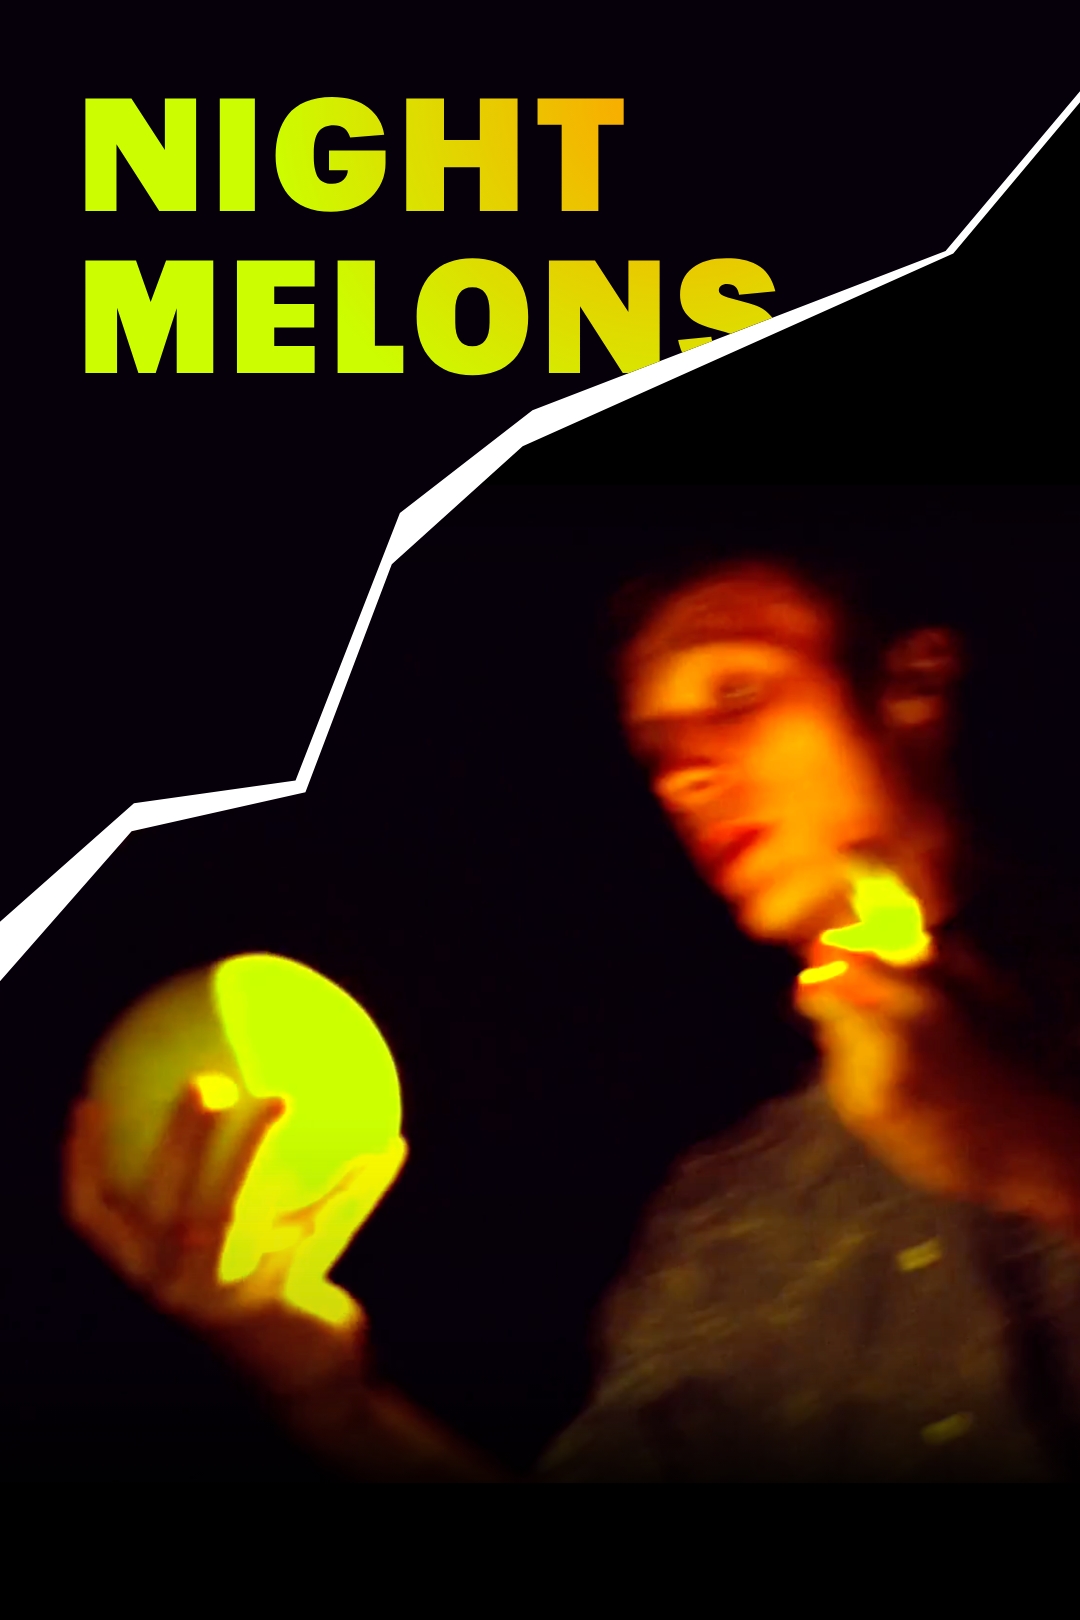 Poster for the film "Night Melons"